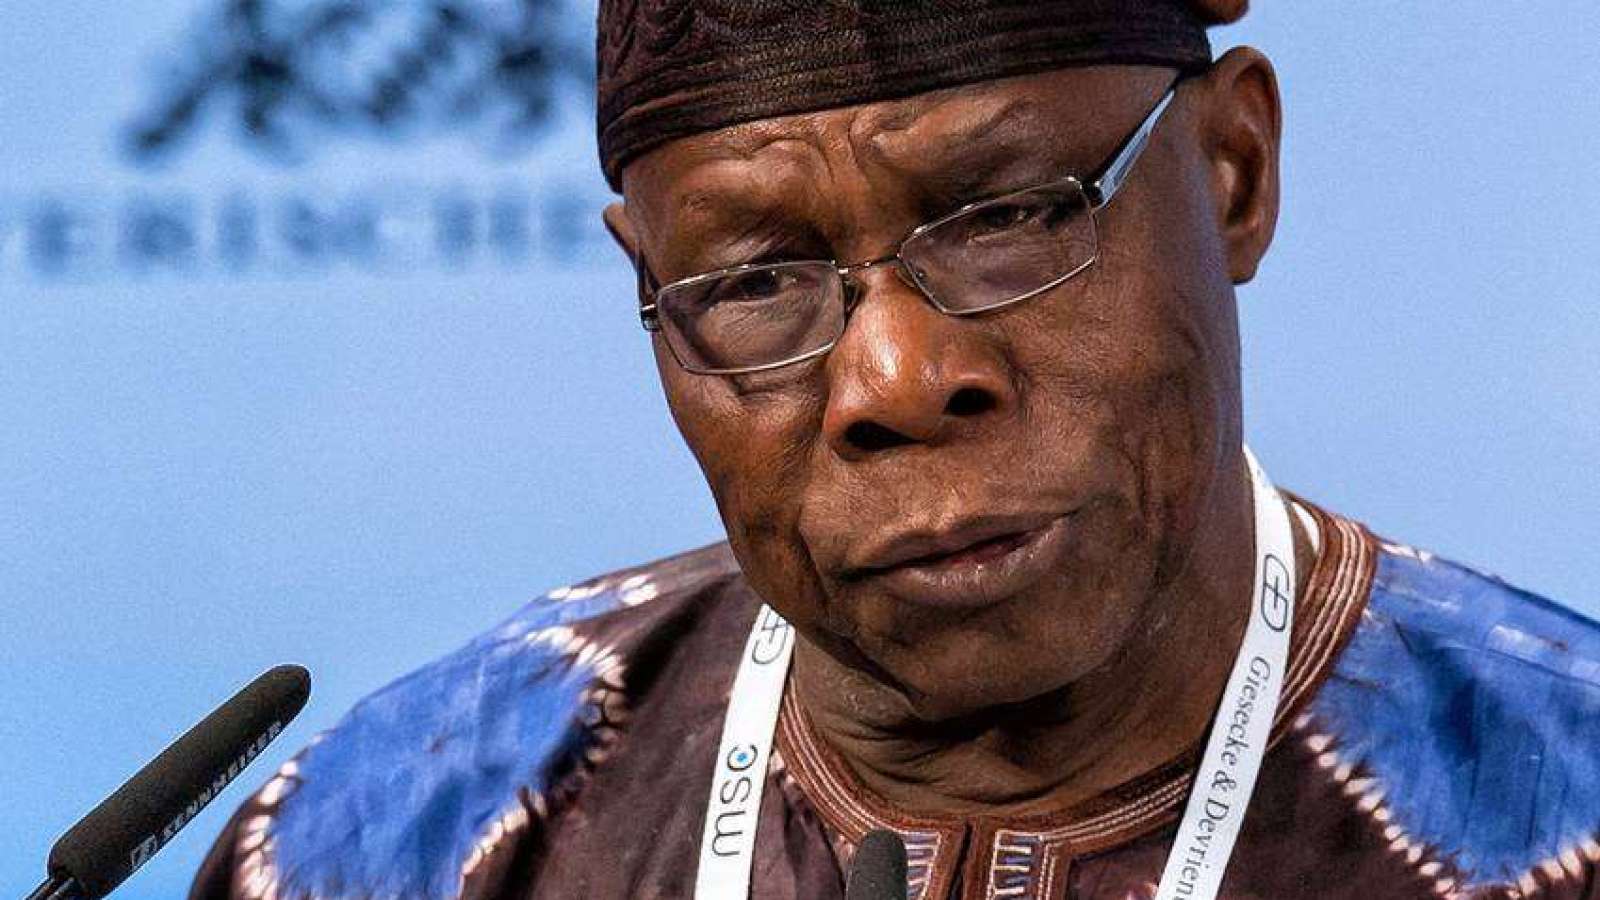 Nigerian youths must oppose those messing up their future - Obasanjo